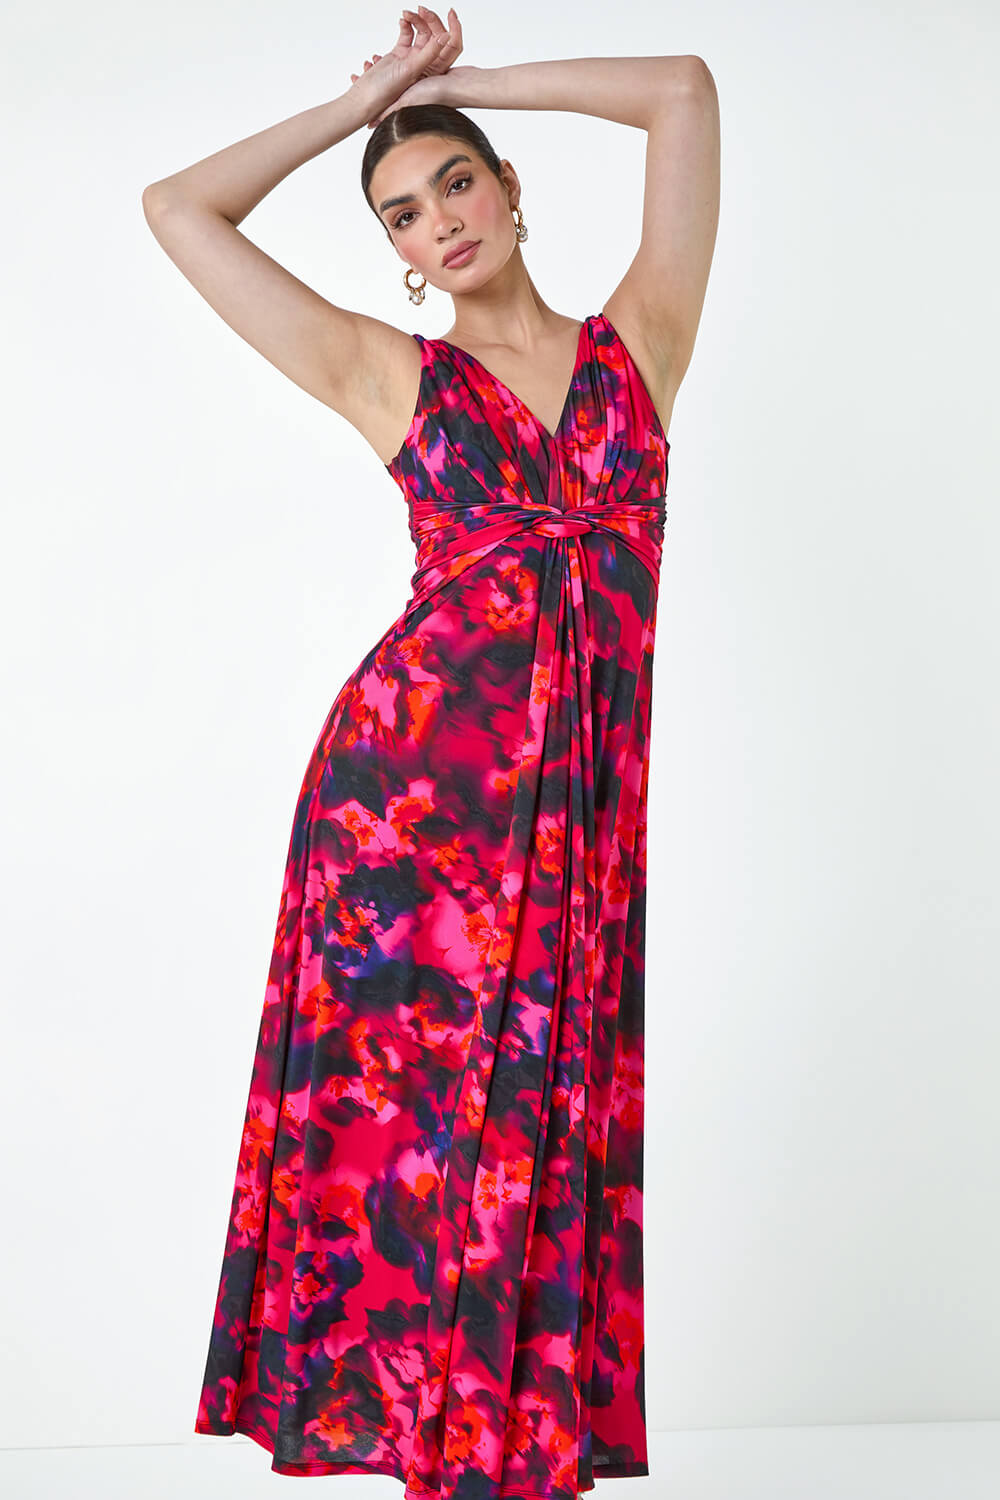 CERISE Floral Knot Front Maxi Dress, Image 2 of 5